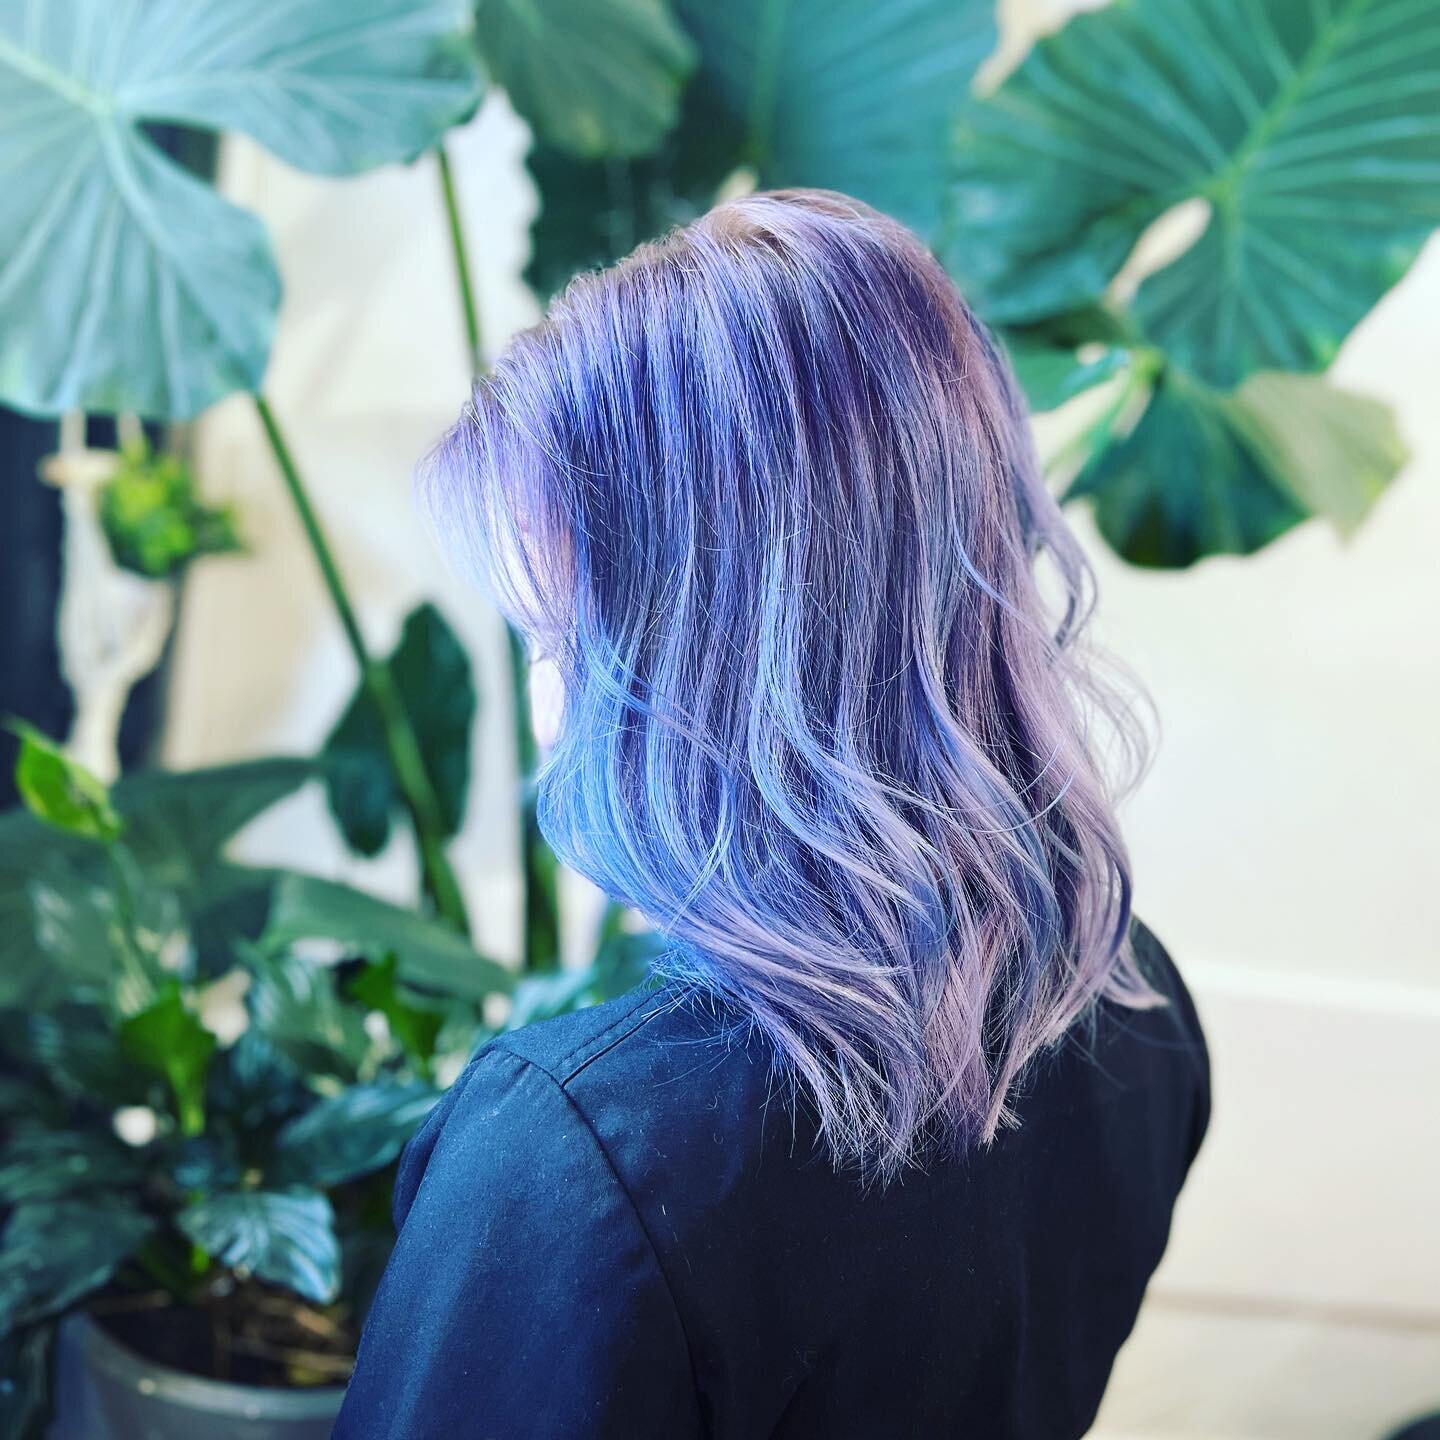 Using Paul Mitchell&rsquo;s Color XG for creating fashion color worthy hues! @paulmitchellpro @paulmitchell @elishaogdahl #jpms #hairstyles #hair #haircolorideas